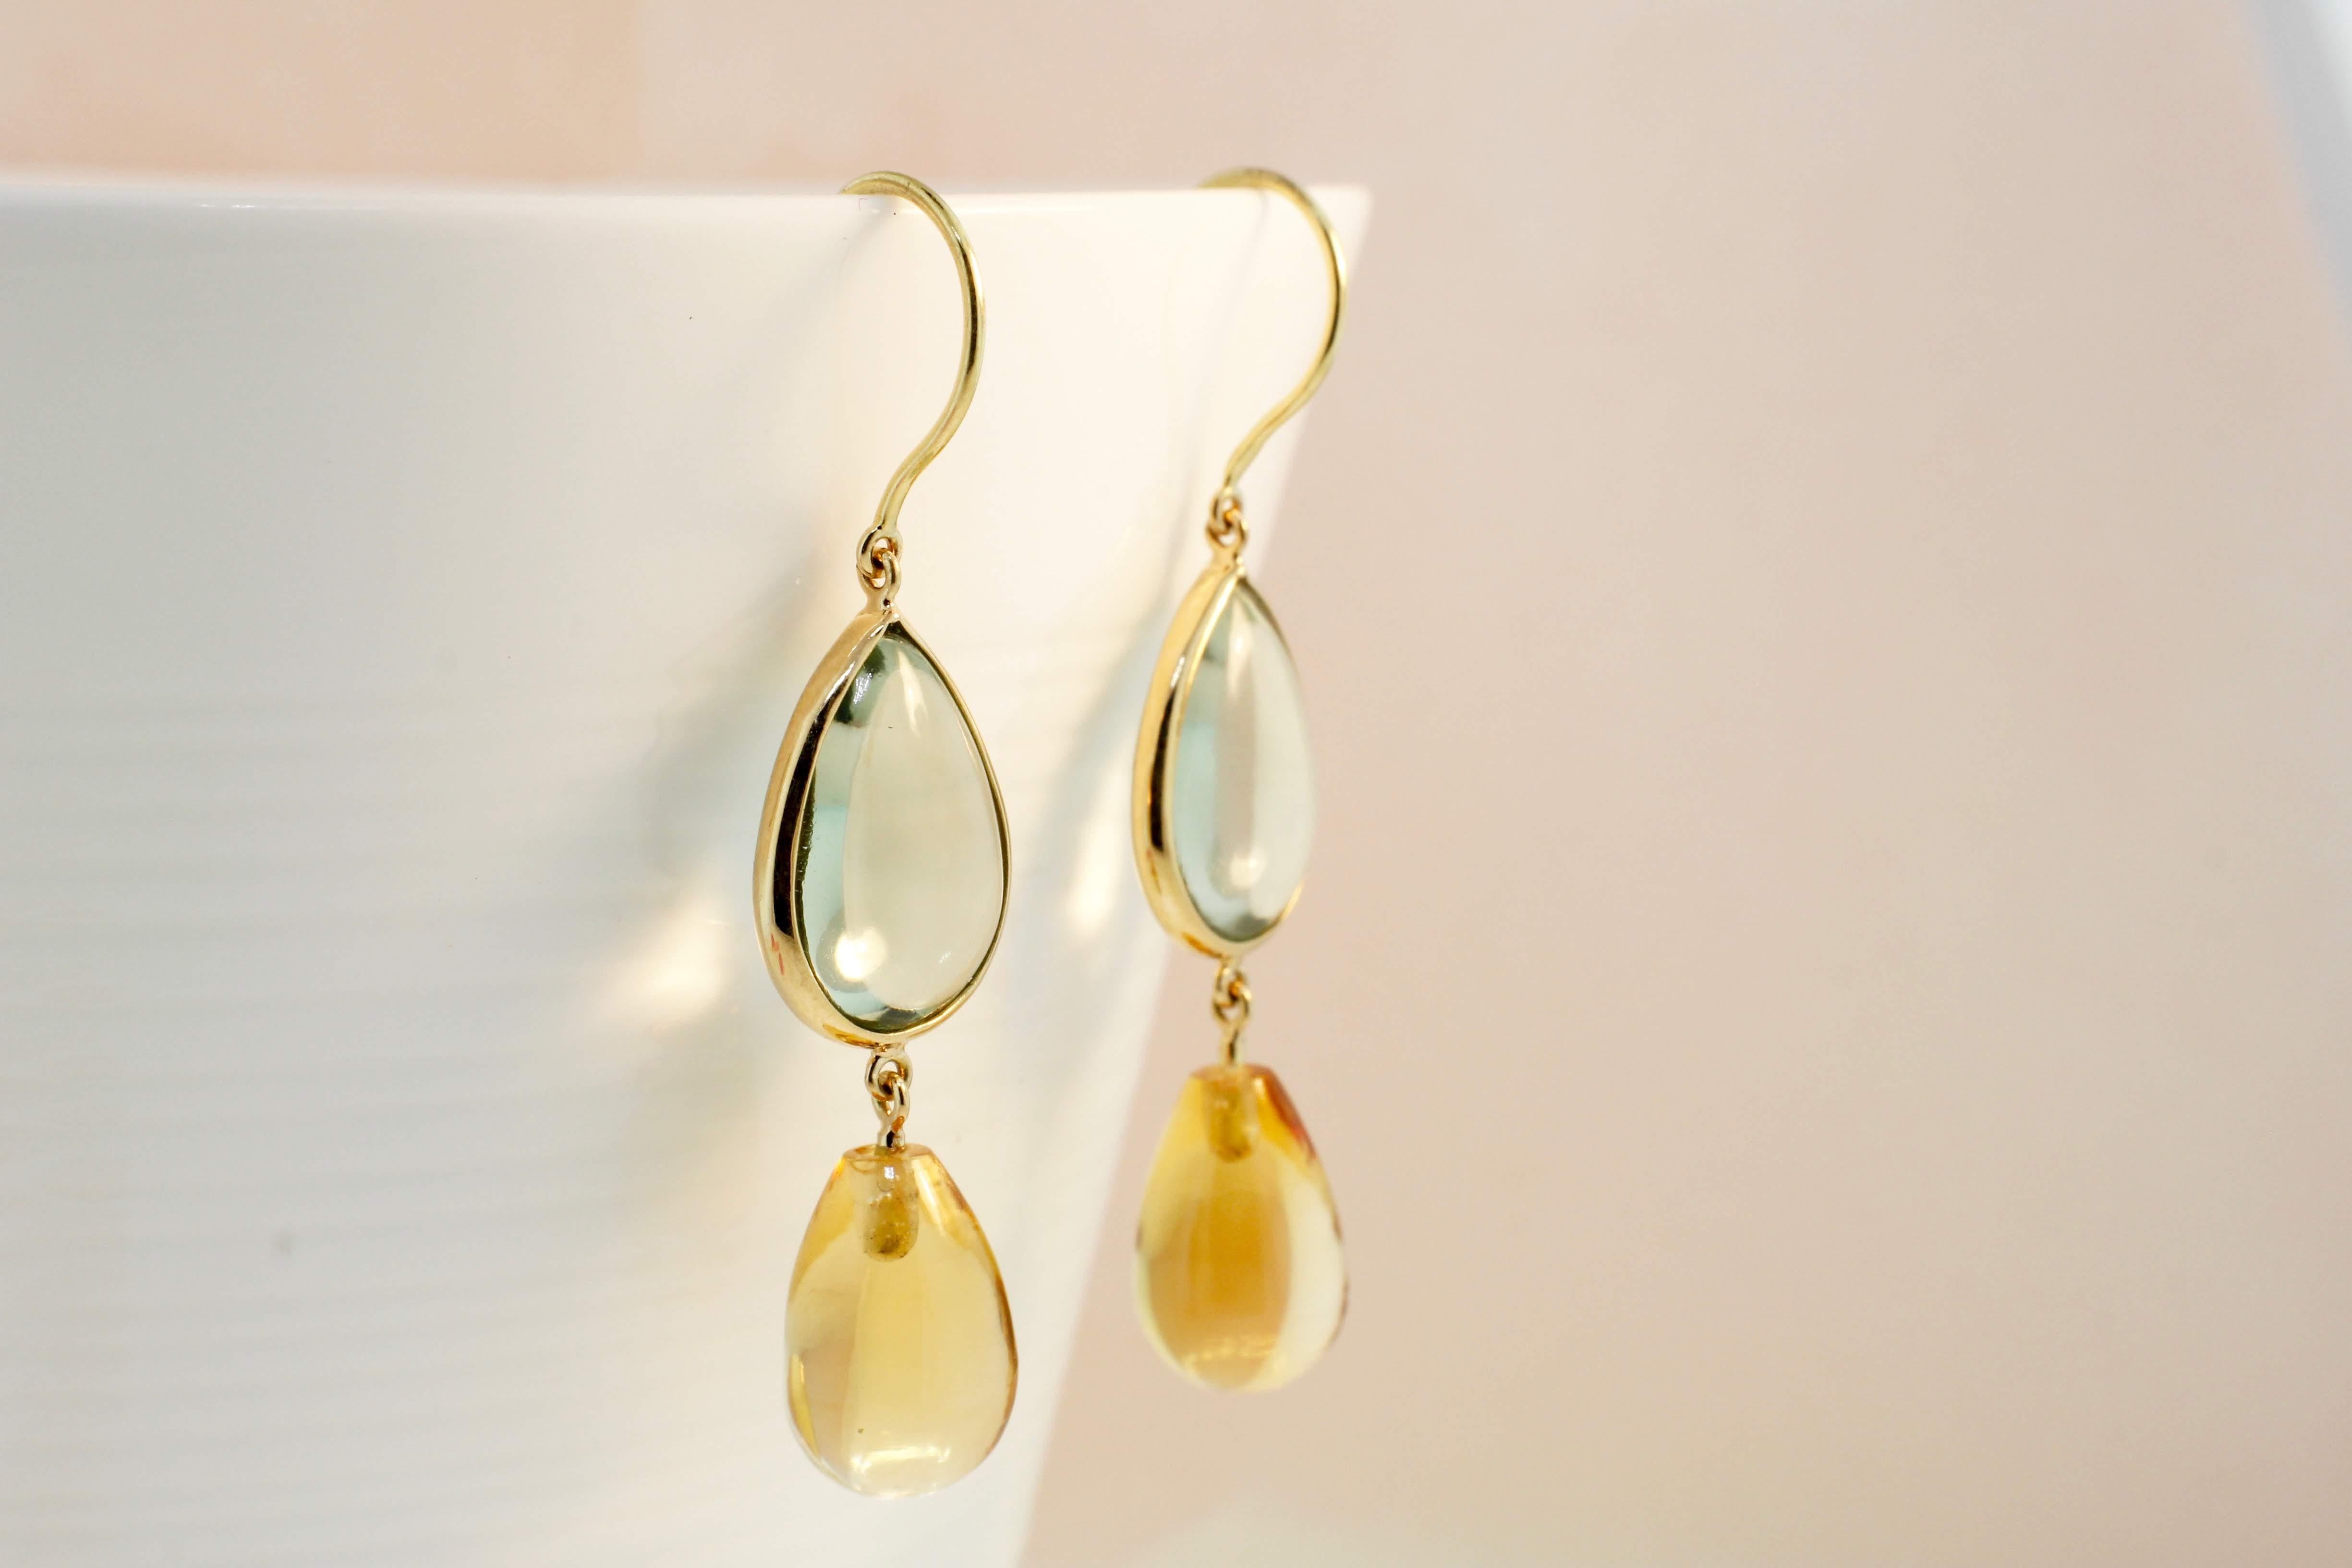 Artisan Nari Fine Jewels Handcrafted Dangle Earrings with Blue Topaz and Citrine in 18k For Sale